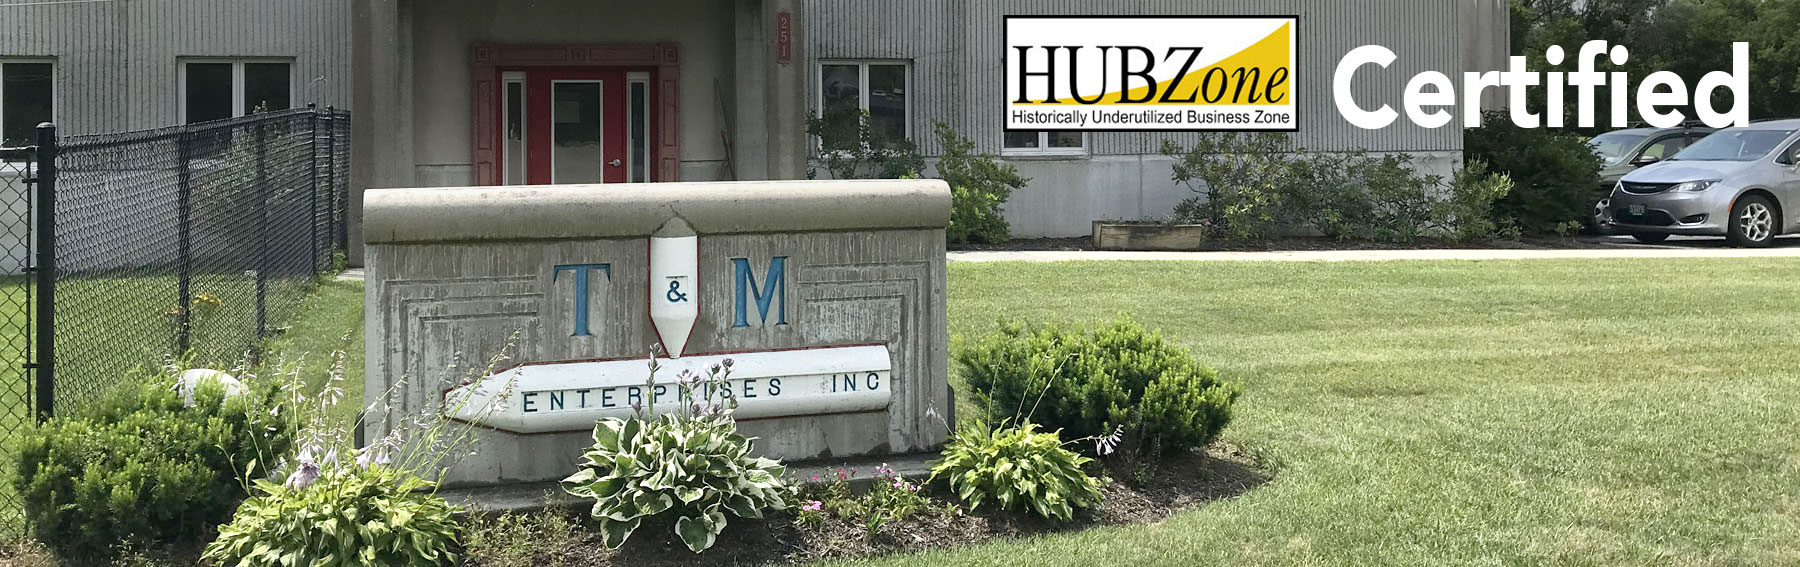 Hub Zone certified small business